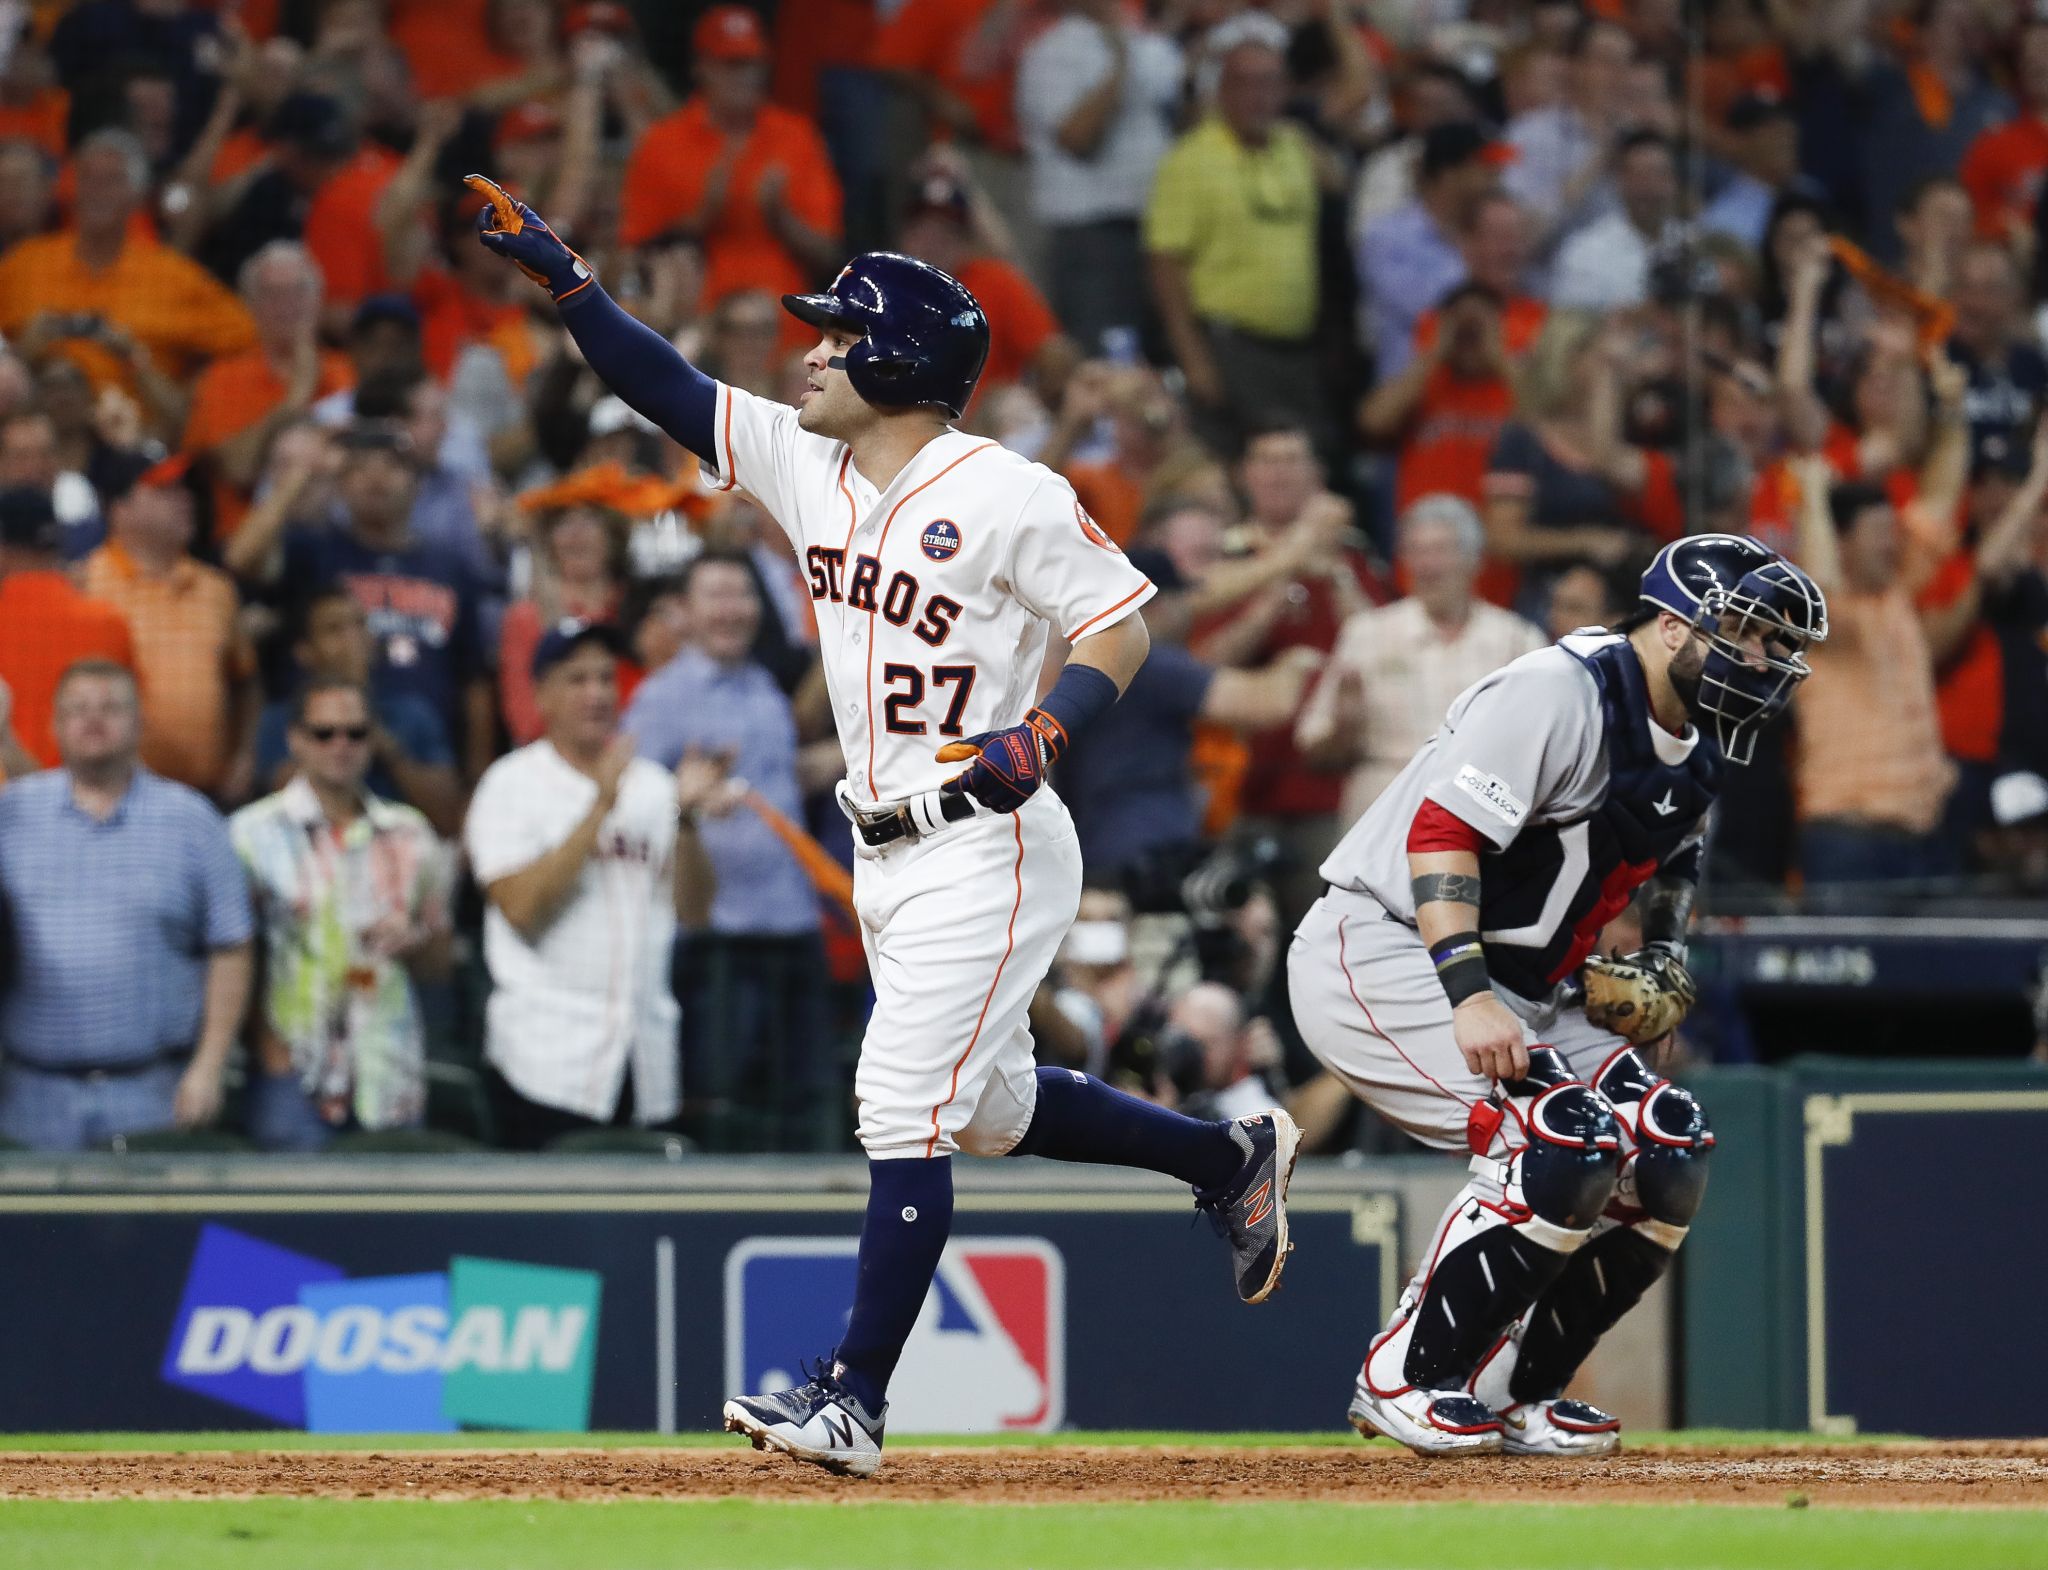 Astros star Jose Altuve named AP Male Athlete of the Year – The Durango  Herald